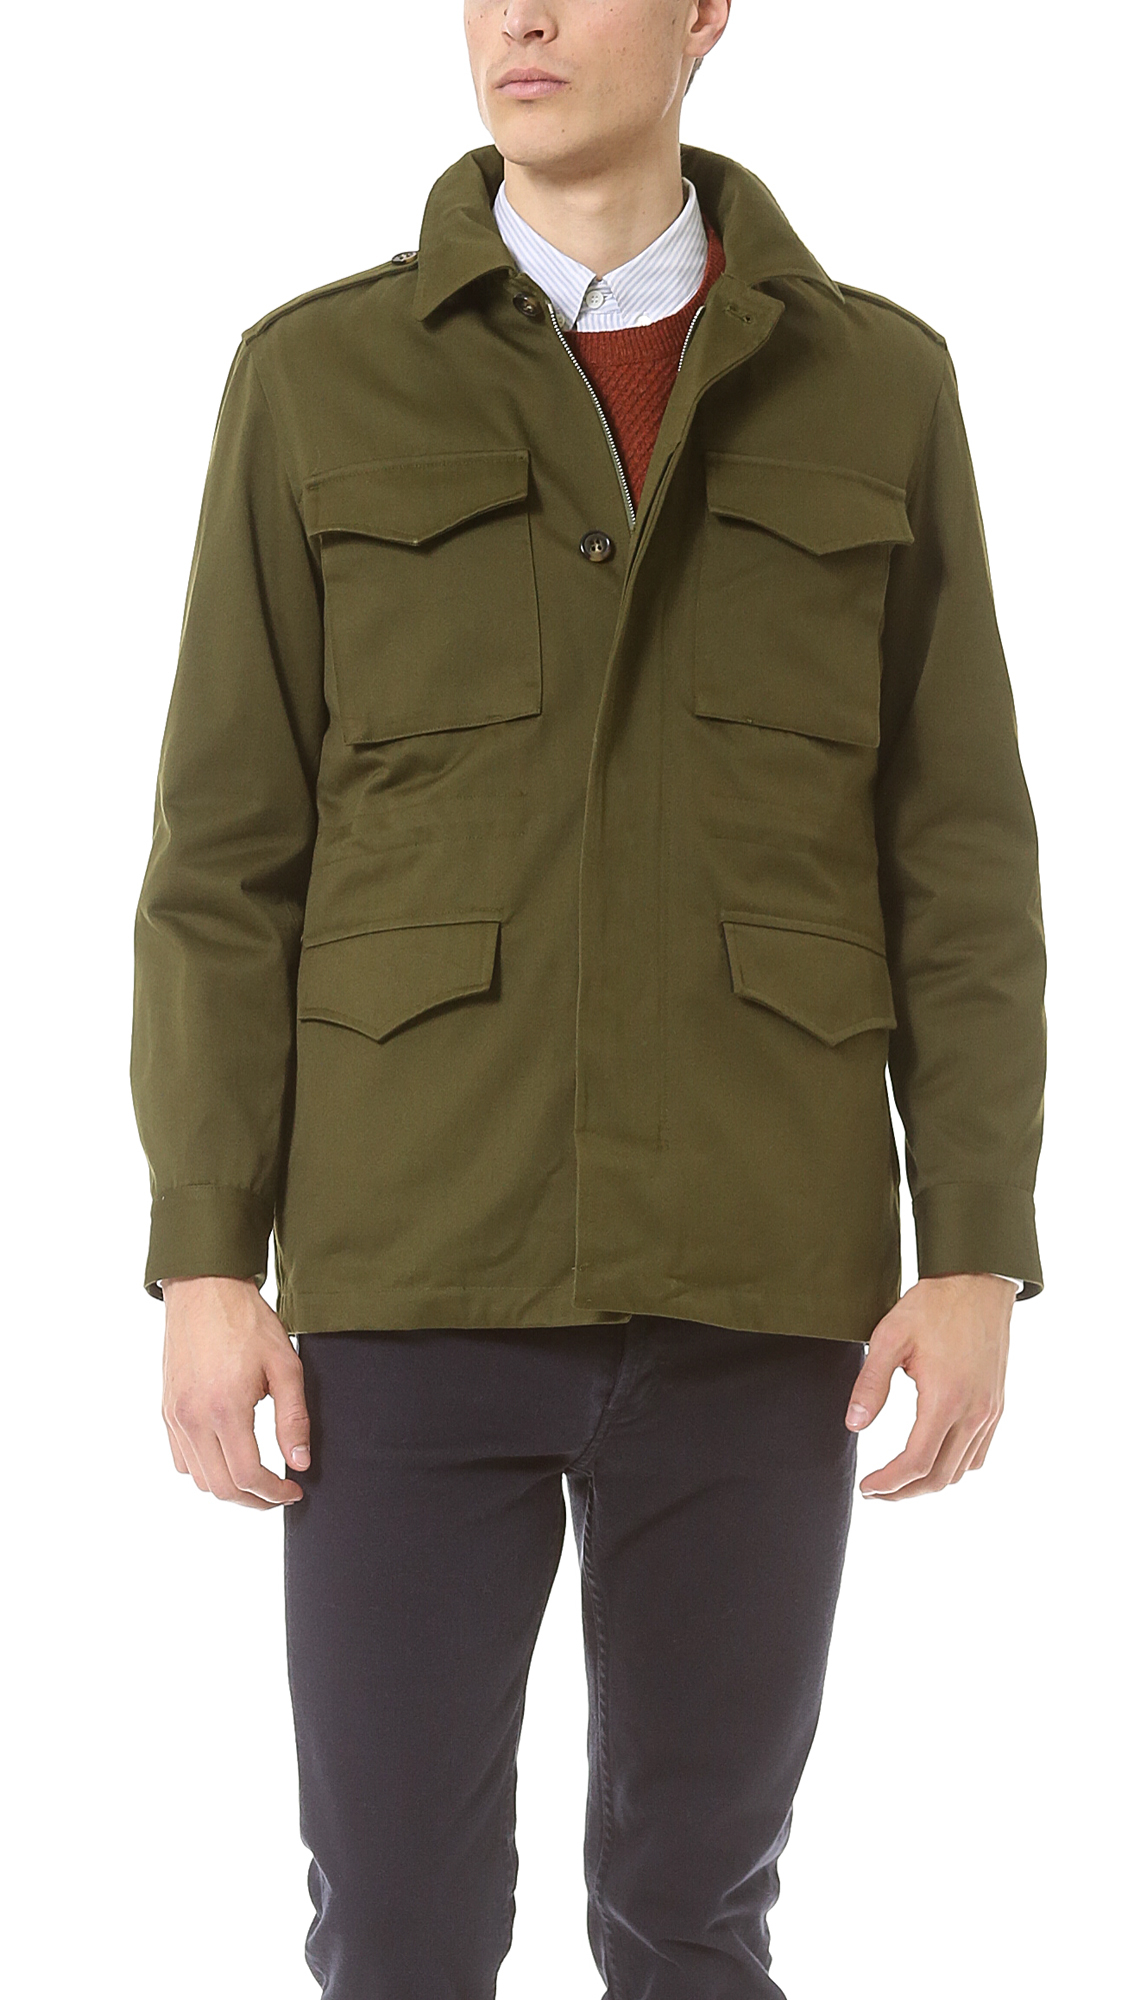 A.P.C. Military Jacket with Removeable Sherpa Liner in Military Khaki ...